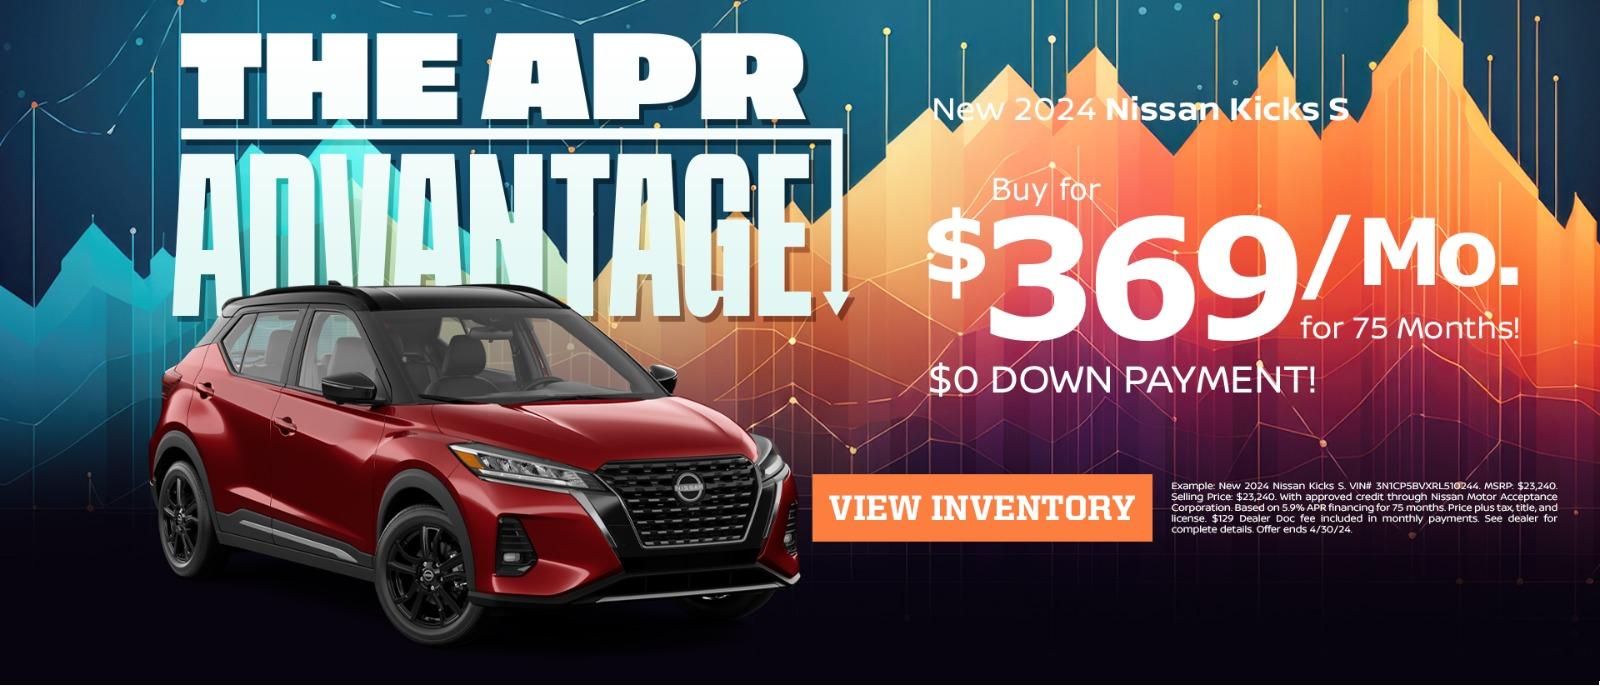 New 2024 Nissan Kicks S
Buy for $369/mo for 75 months!
$0 down payment!